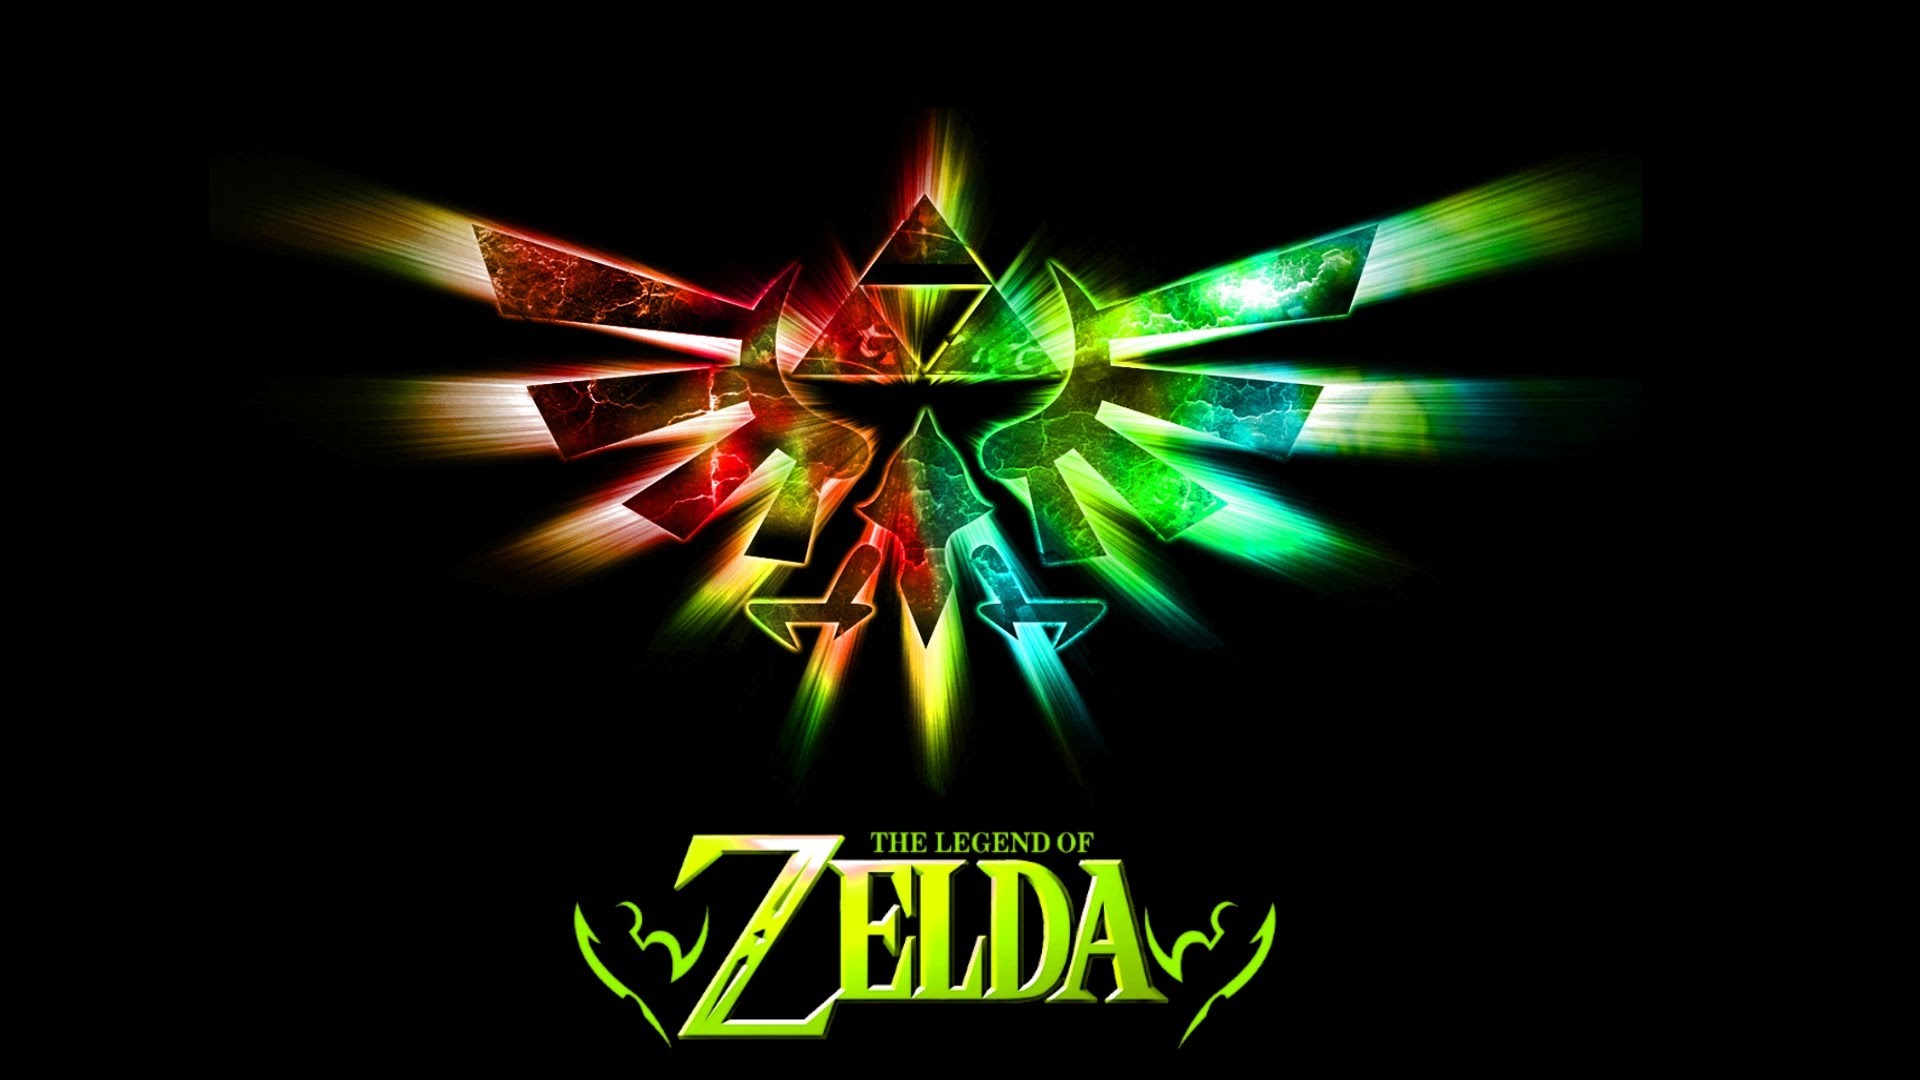 April Zelda HD Background For Pc Full HDq Pictures